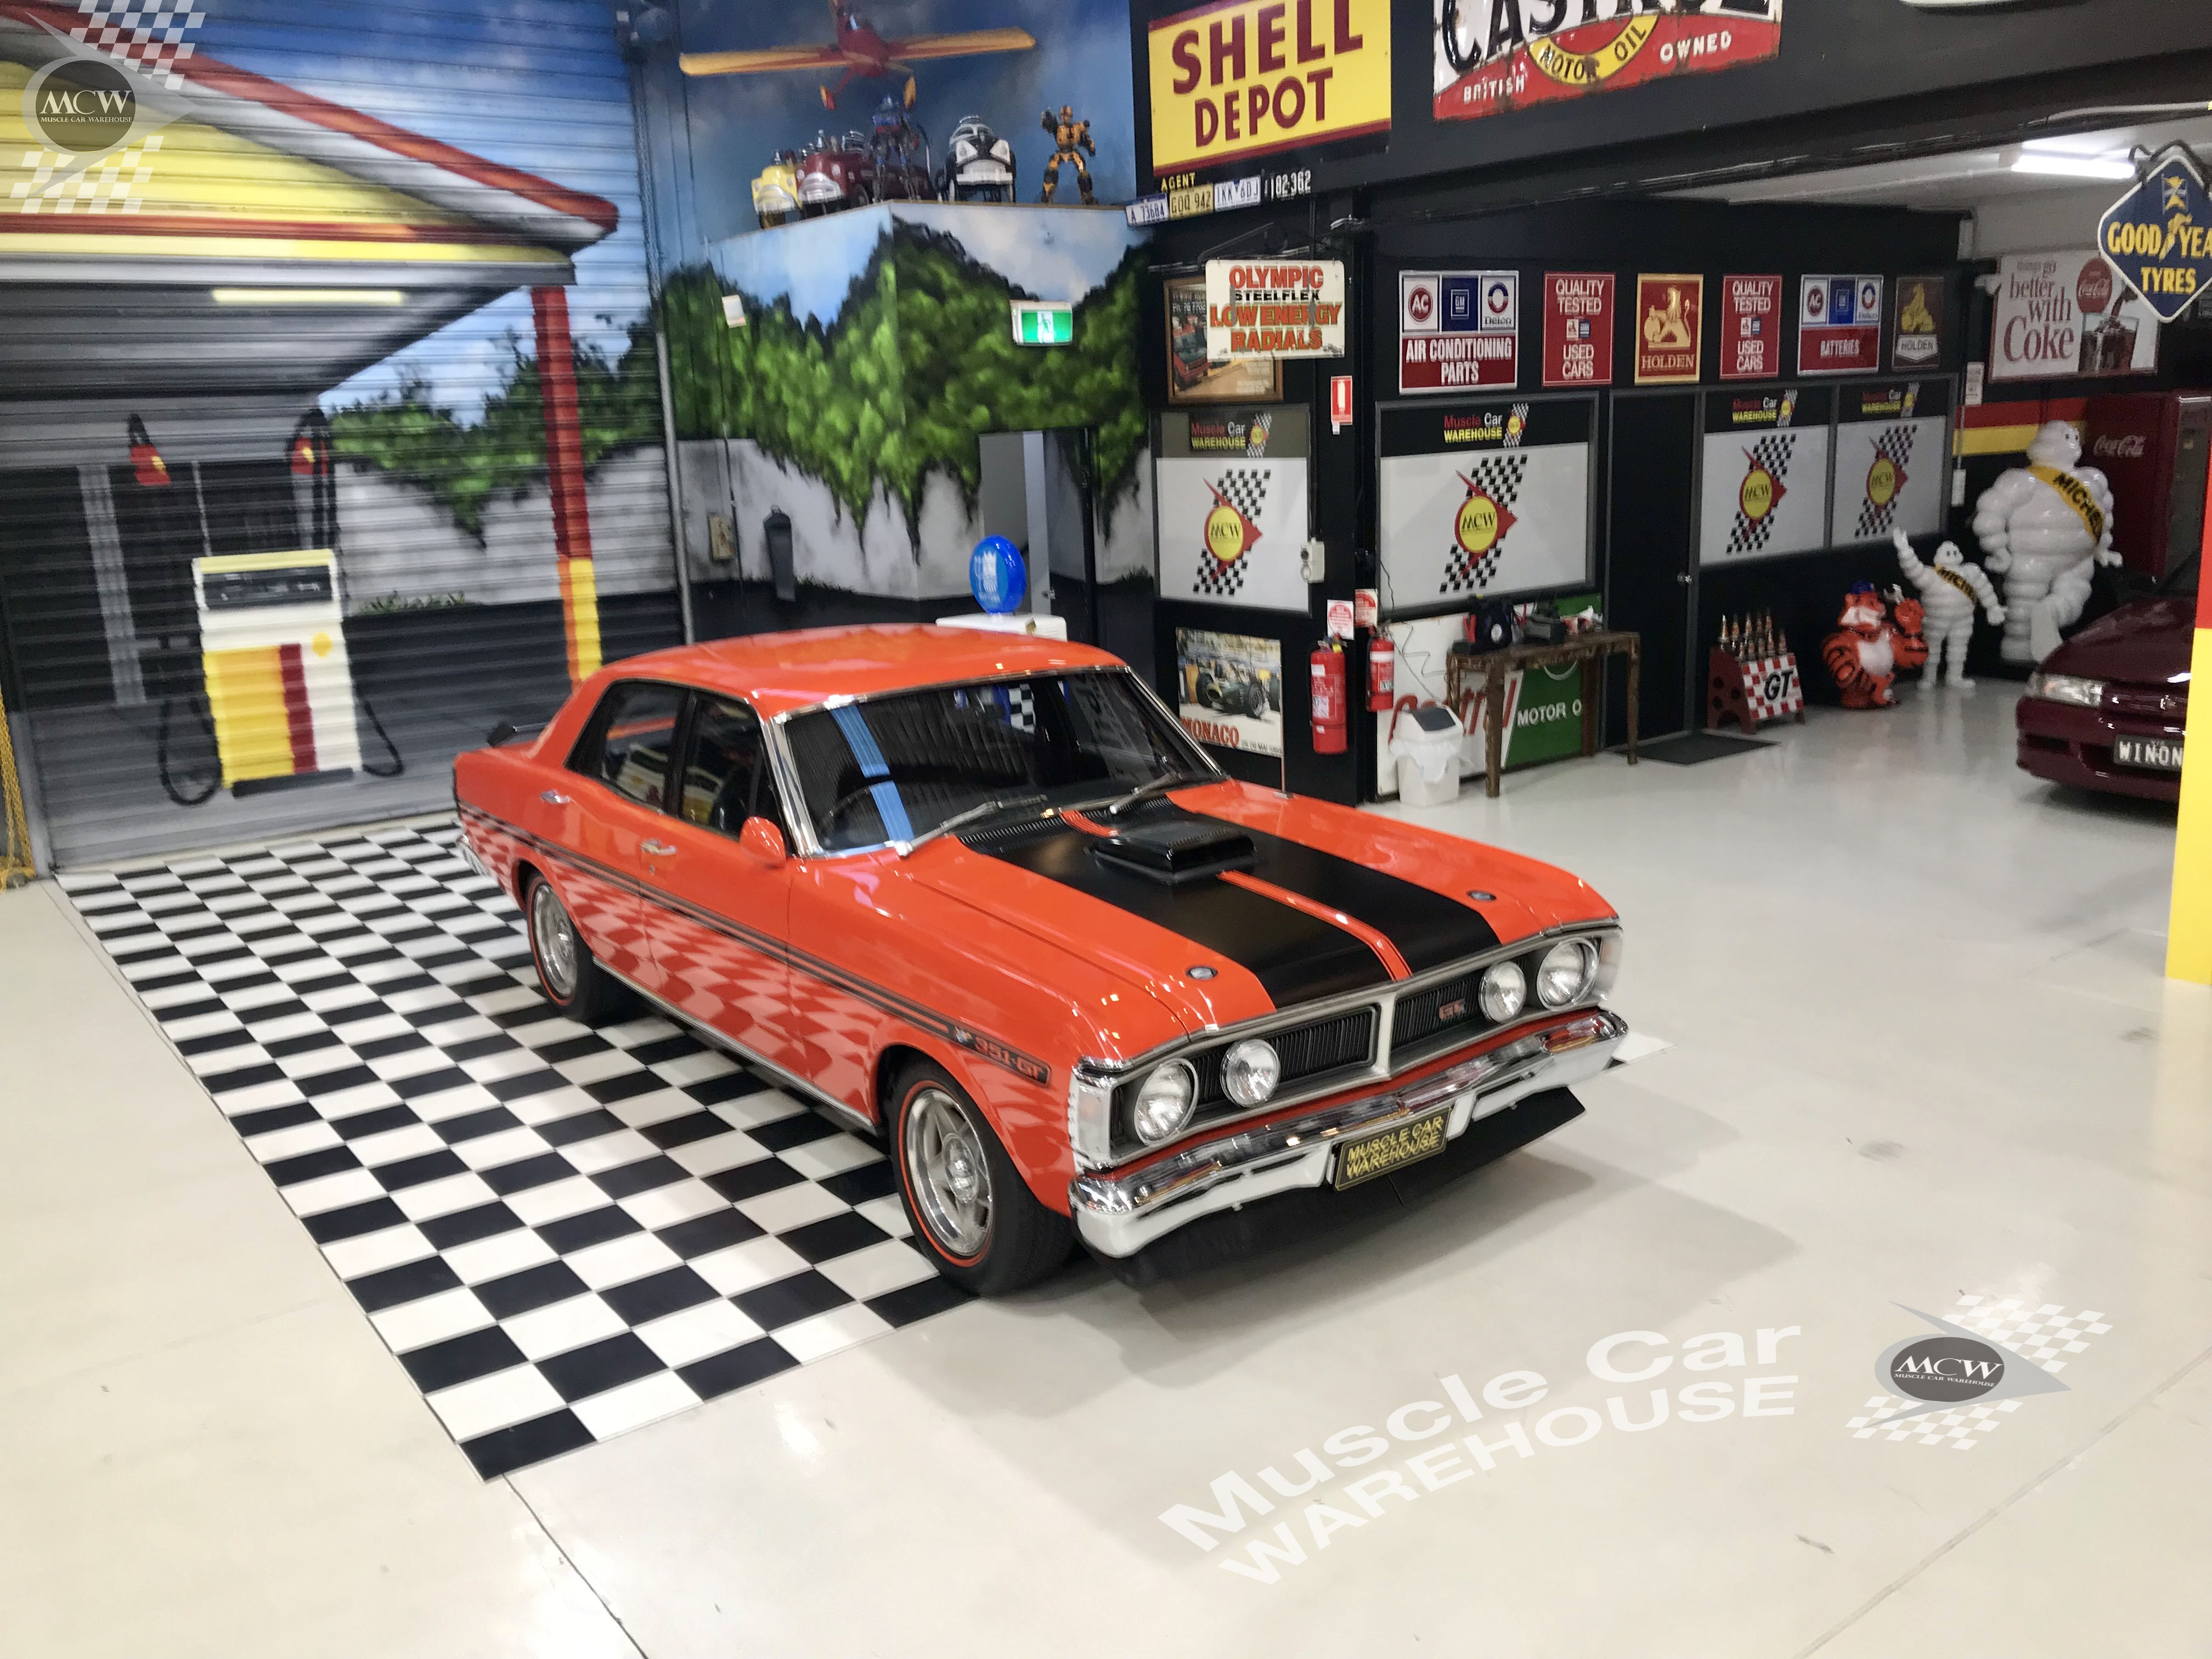 Ford Falcon XY GTHO Phase 3 | Muscle Car Warehouse